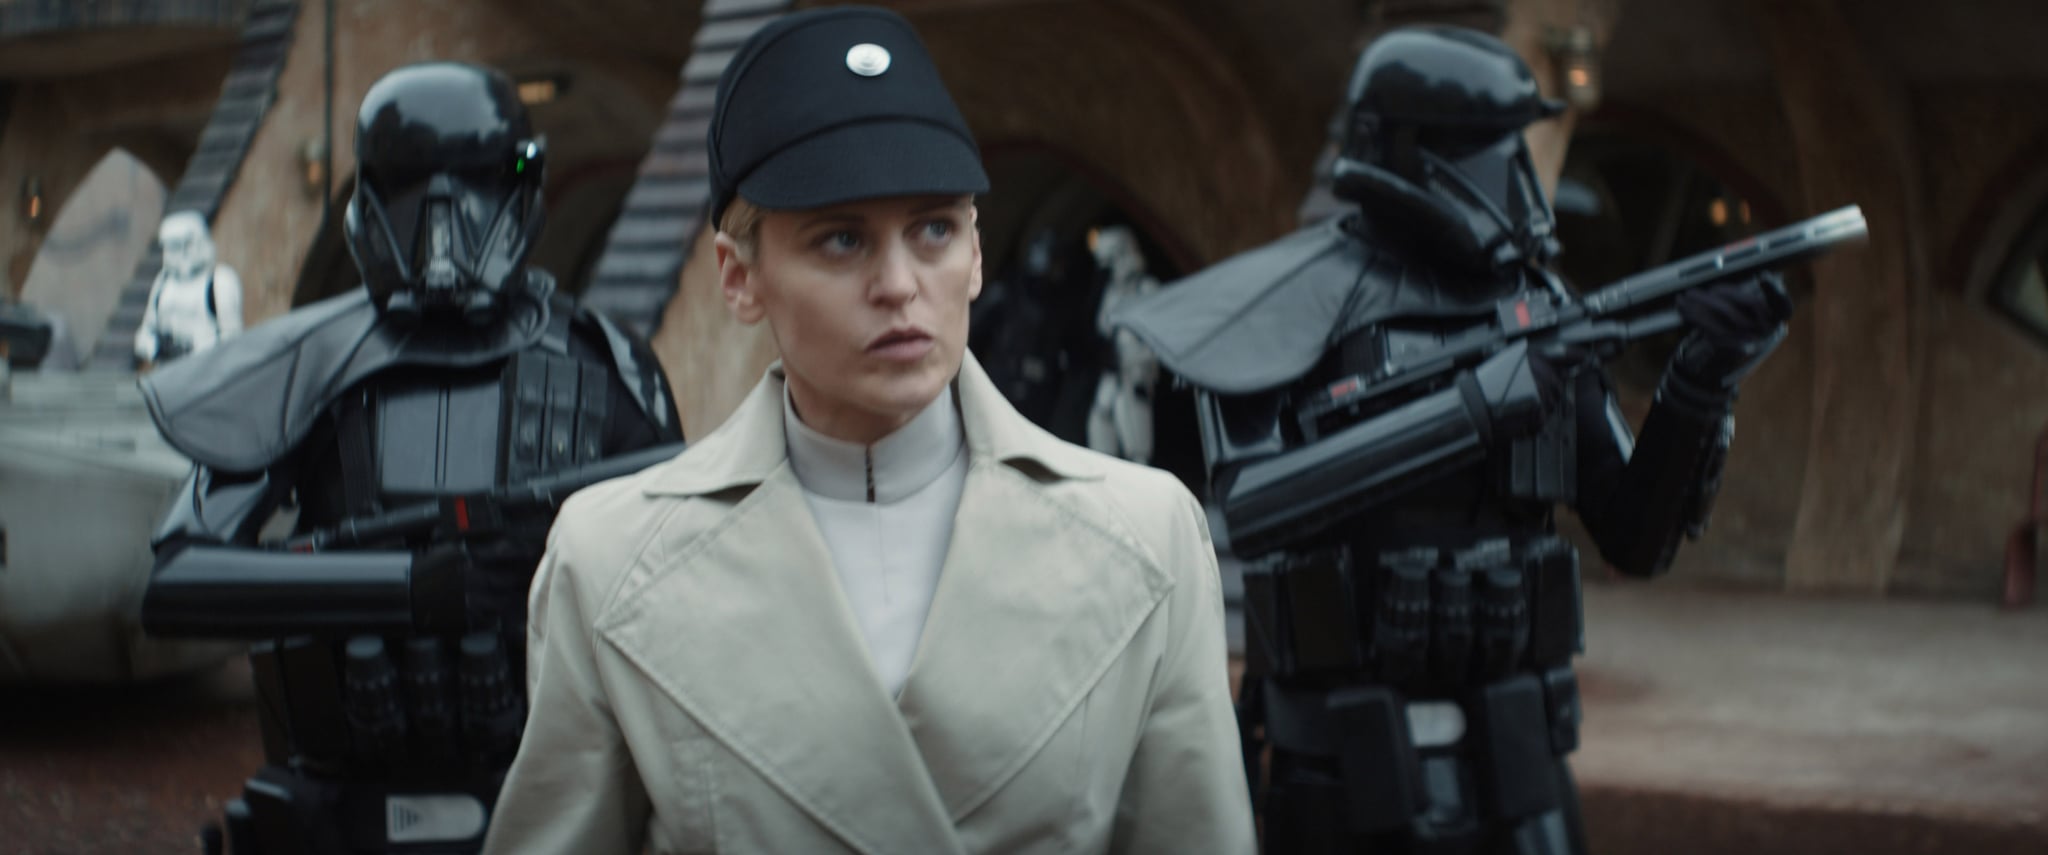 Supervisor Dedra Meero (Denise Gough) in Lucasfilm's ANDOR, exclusively on Disney+. ©2022 Lucasfilm Ltd. & TM. All Rights Reserved.